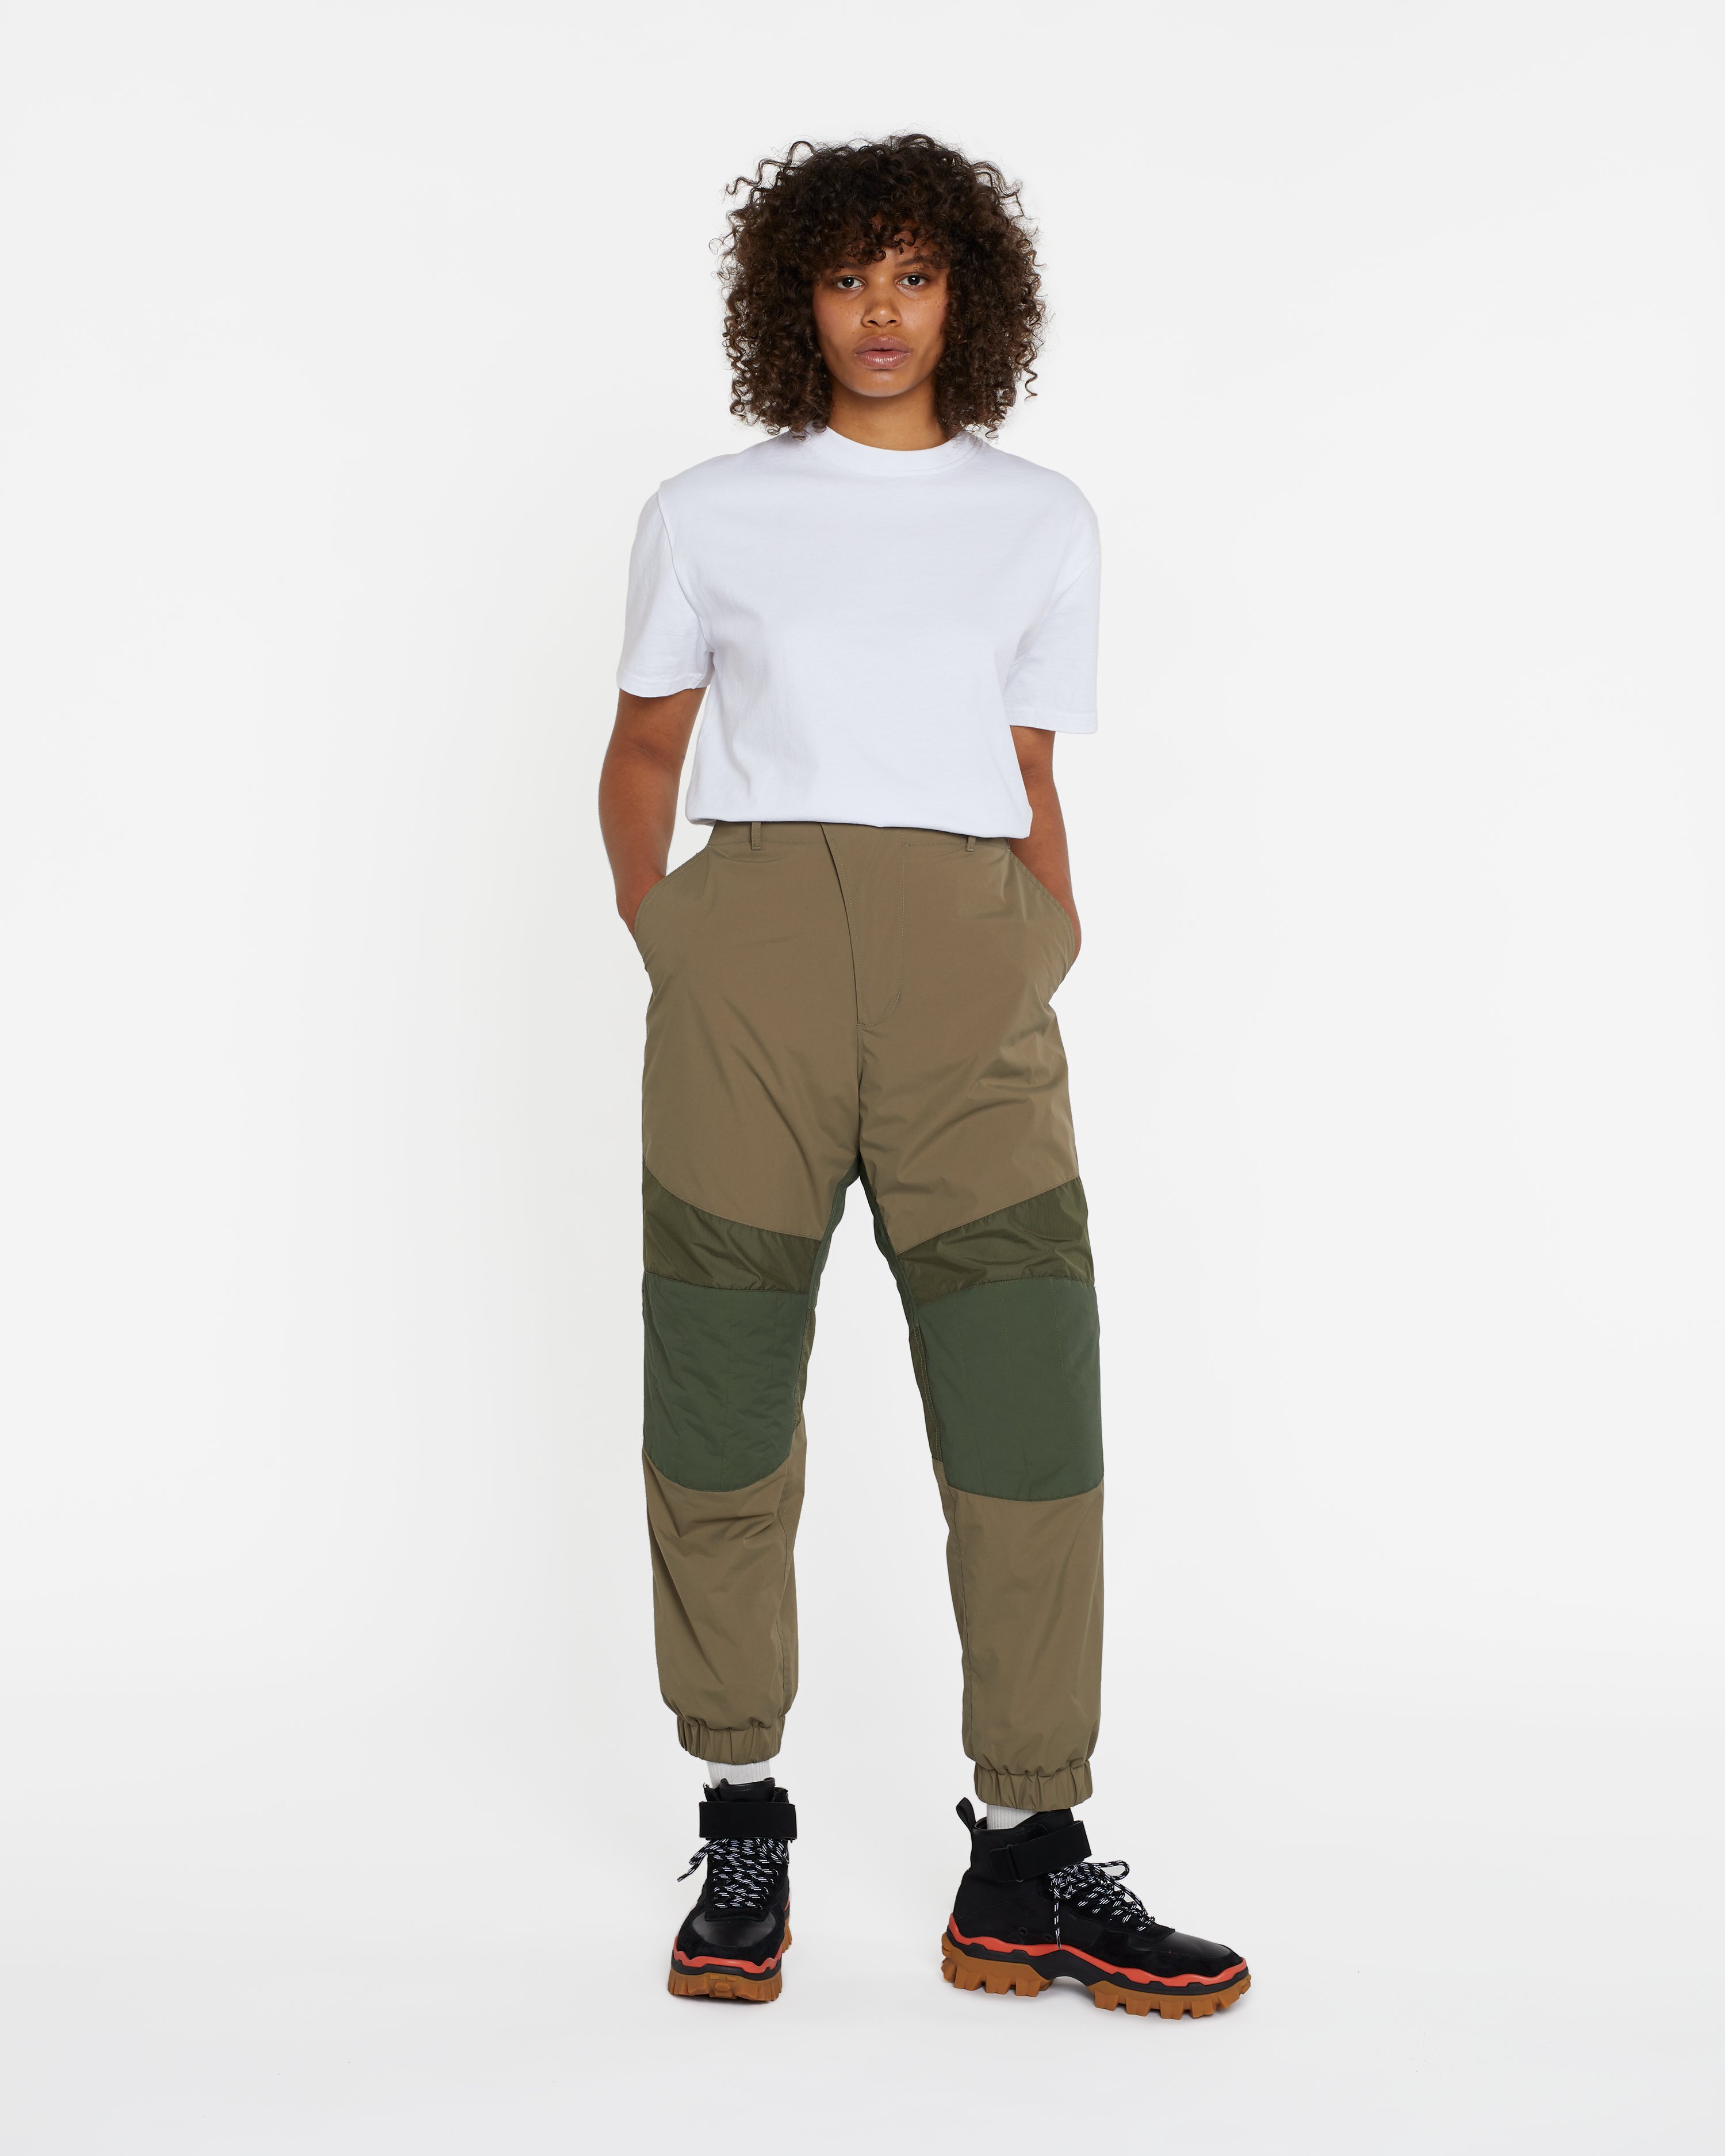 Moncler Genius - Recycled Sports Trousers - Clothing - Green - Image 4